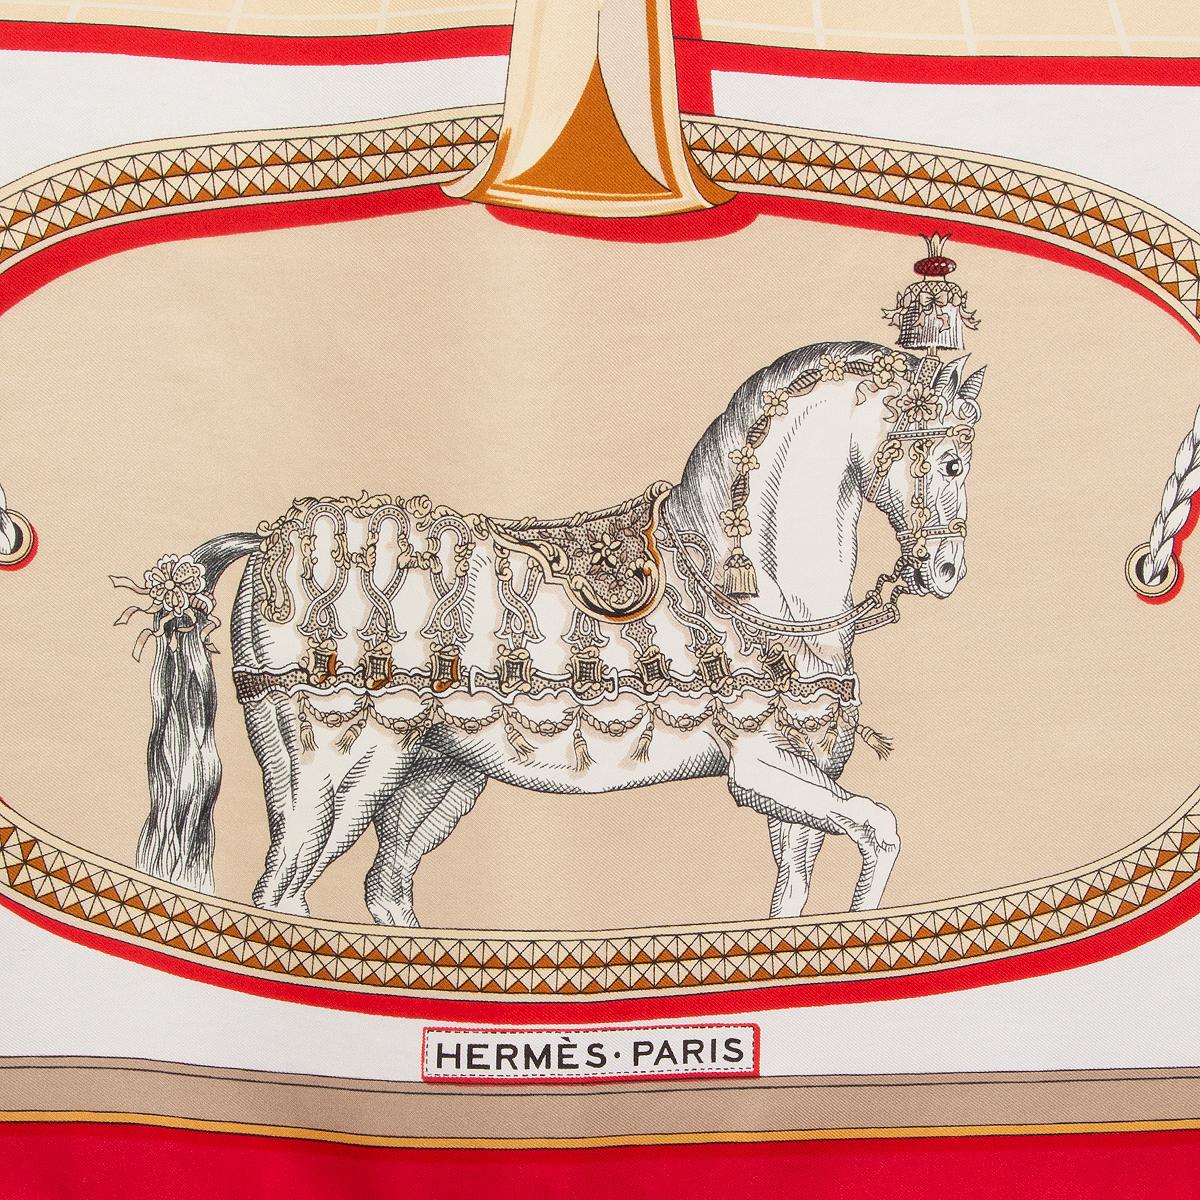 Hermes 'Grand Apparat 90' scarf by Jacques Eudel in white silk twill (100%) with red border and details in light beige and grey. Has been worn and is in excellent condition.

Width 90cm (35.1in)
Height 90cm (35.1in)